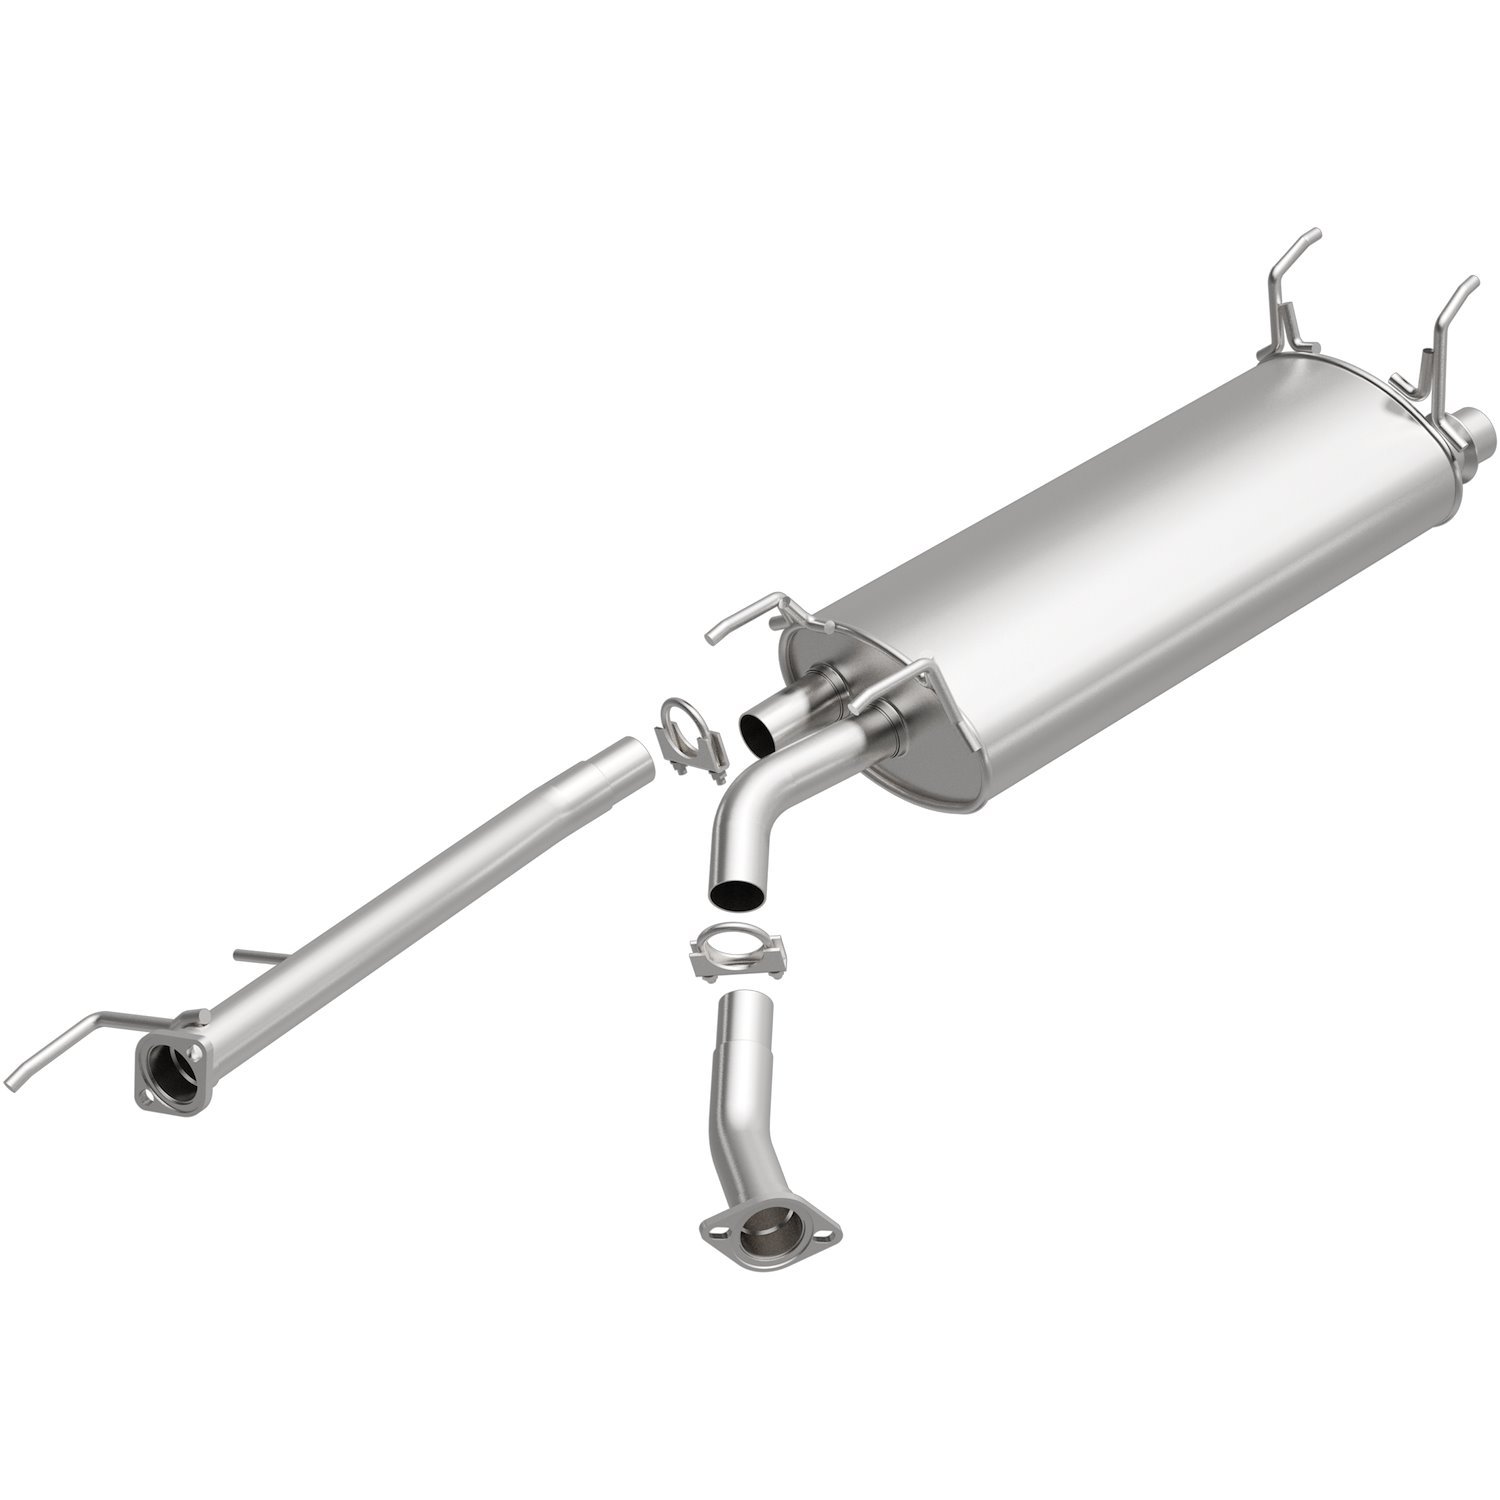 Direct-Fit Exhaust Muffler, 2001-2007 Toyota Sequoia 4.7L